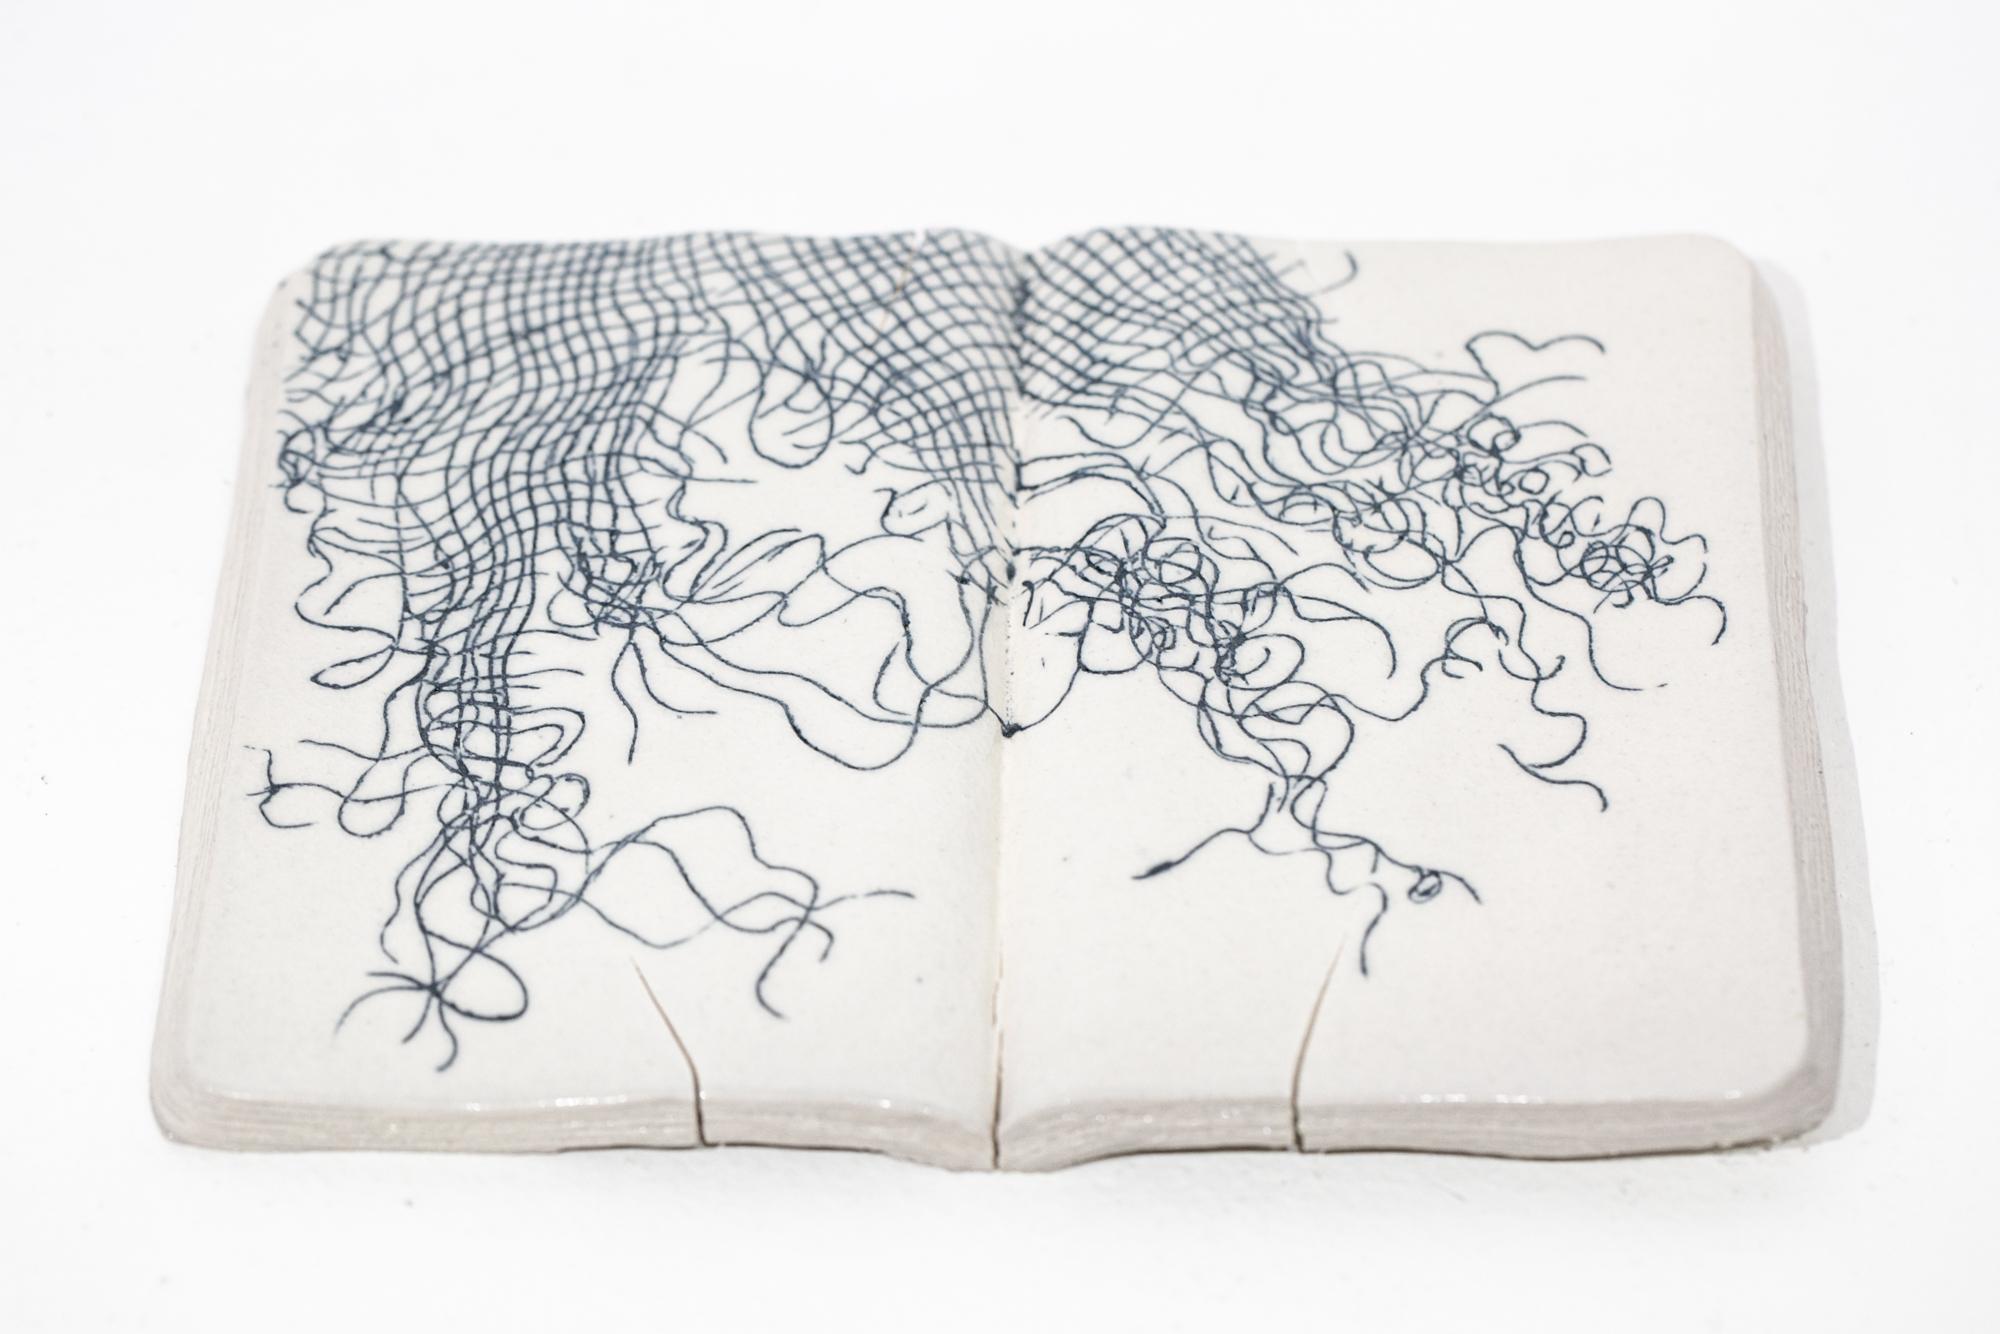 Yoonmi Nam Abstract Sculpture - Sketchbook (small #4)